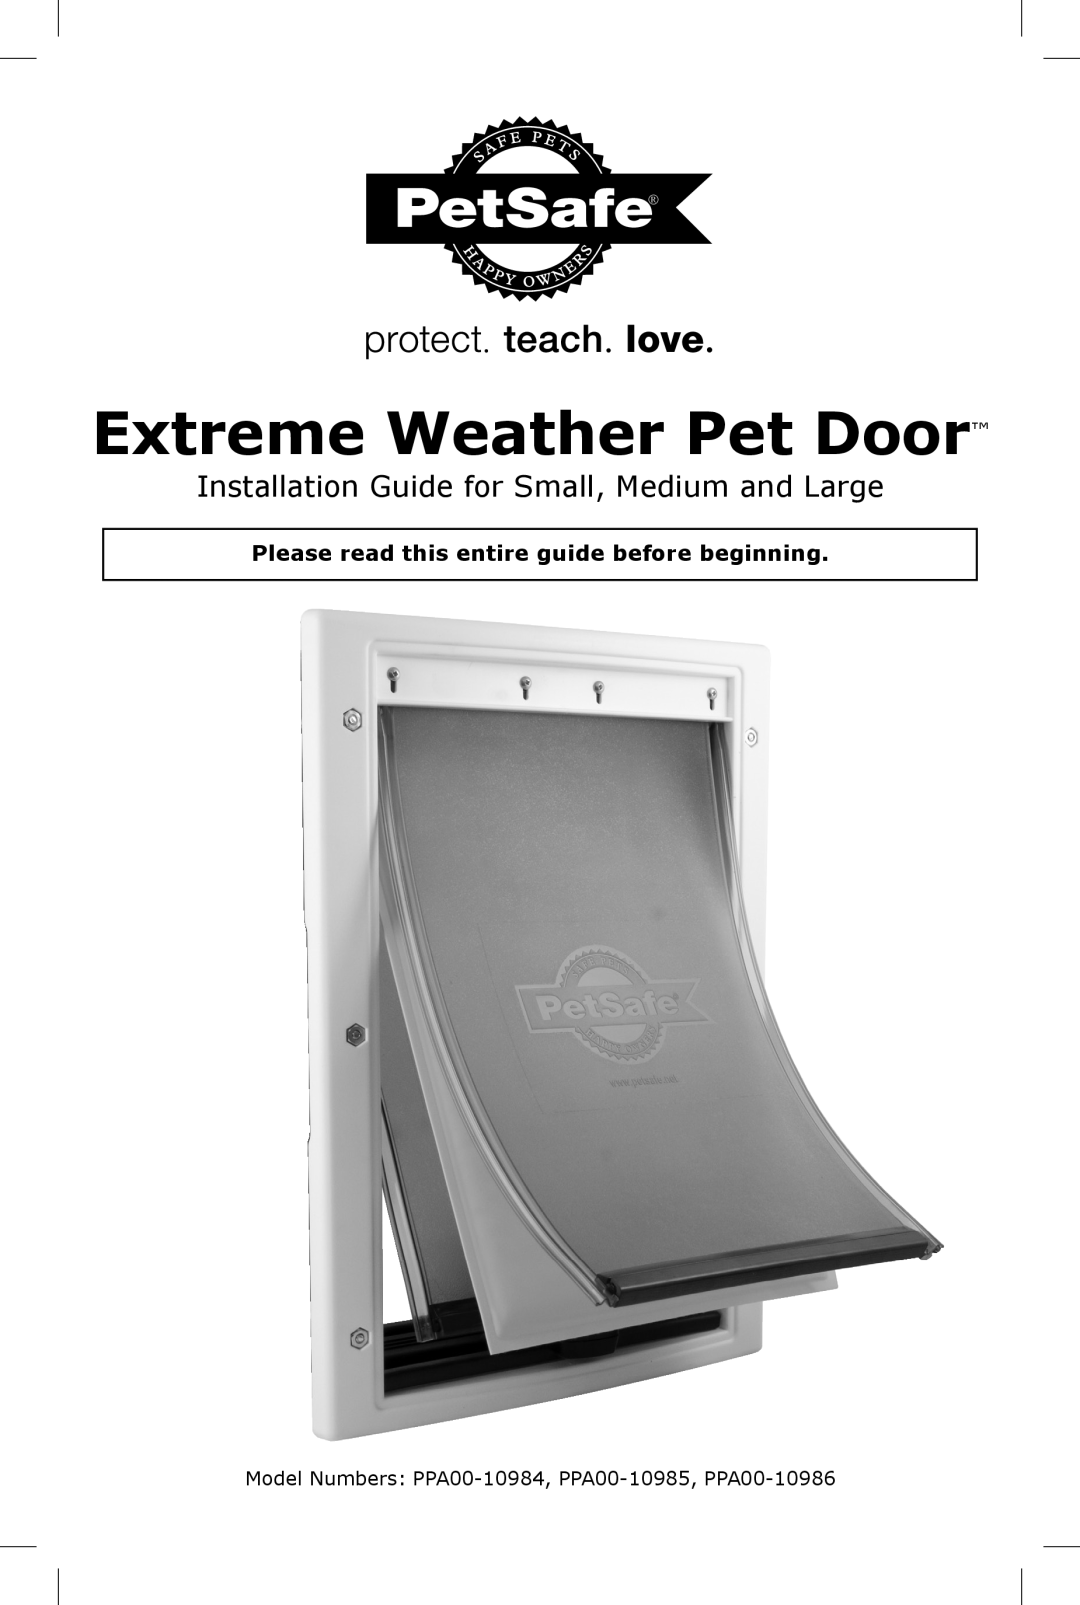 Petsafe PPA00-10984 manual Please read this entire guide before beginning, Extreme Weather Pet Door 